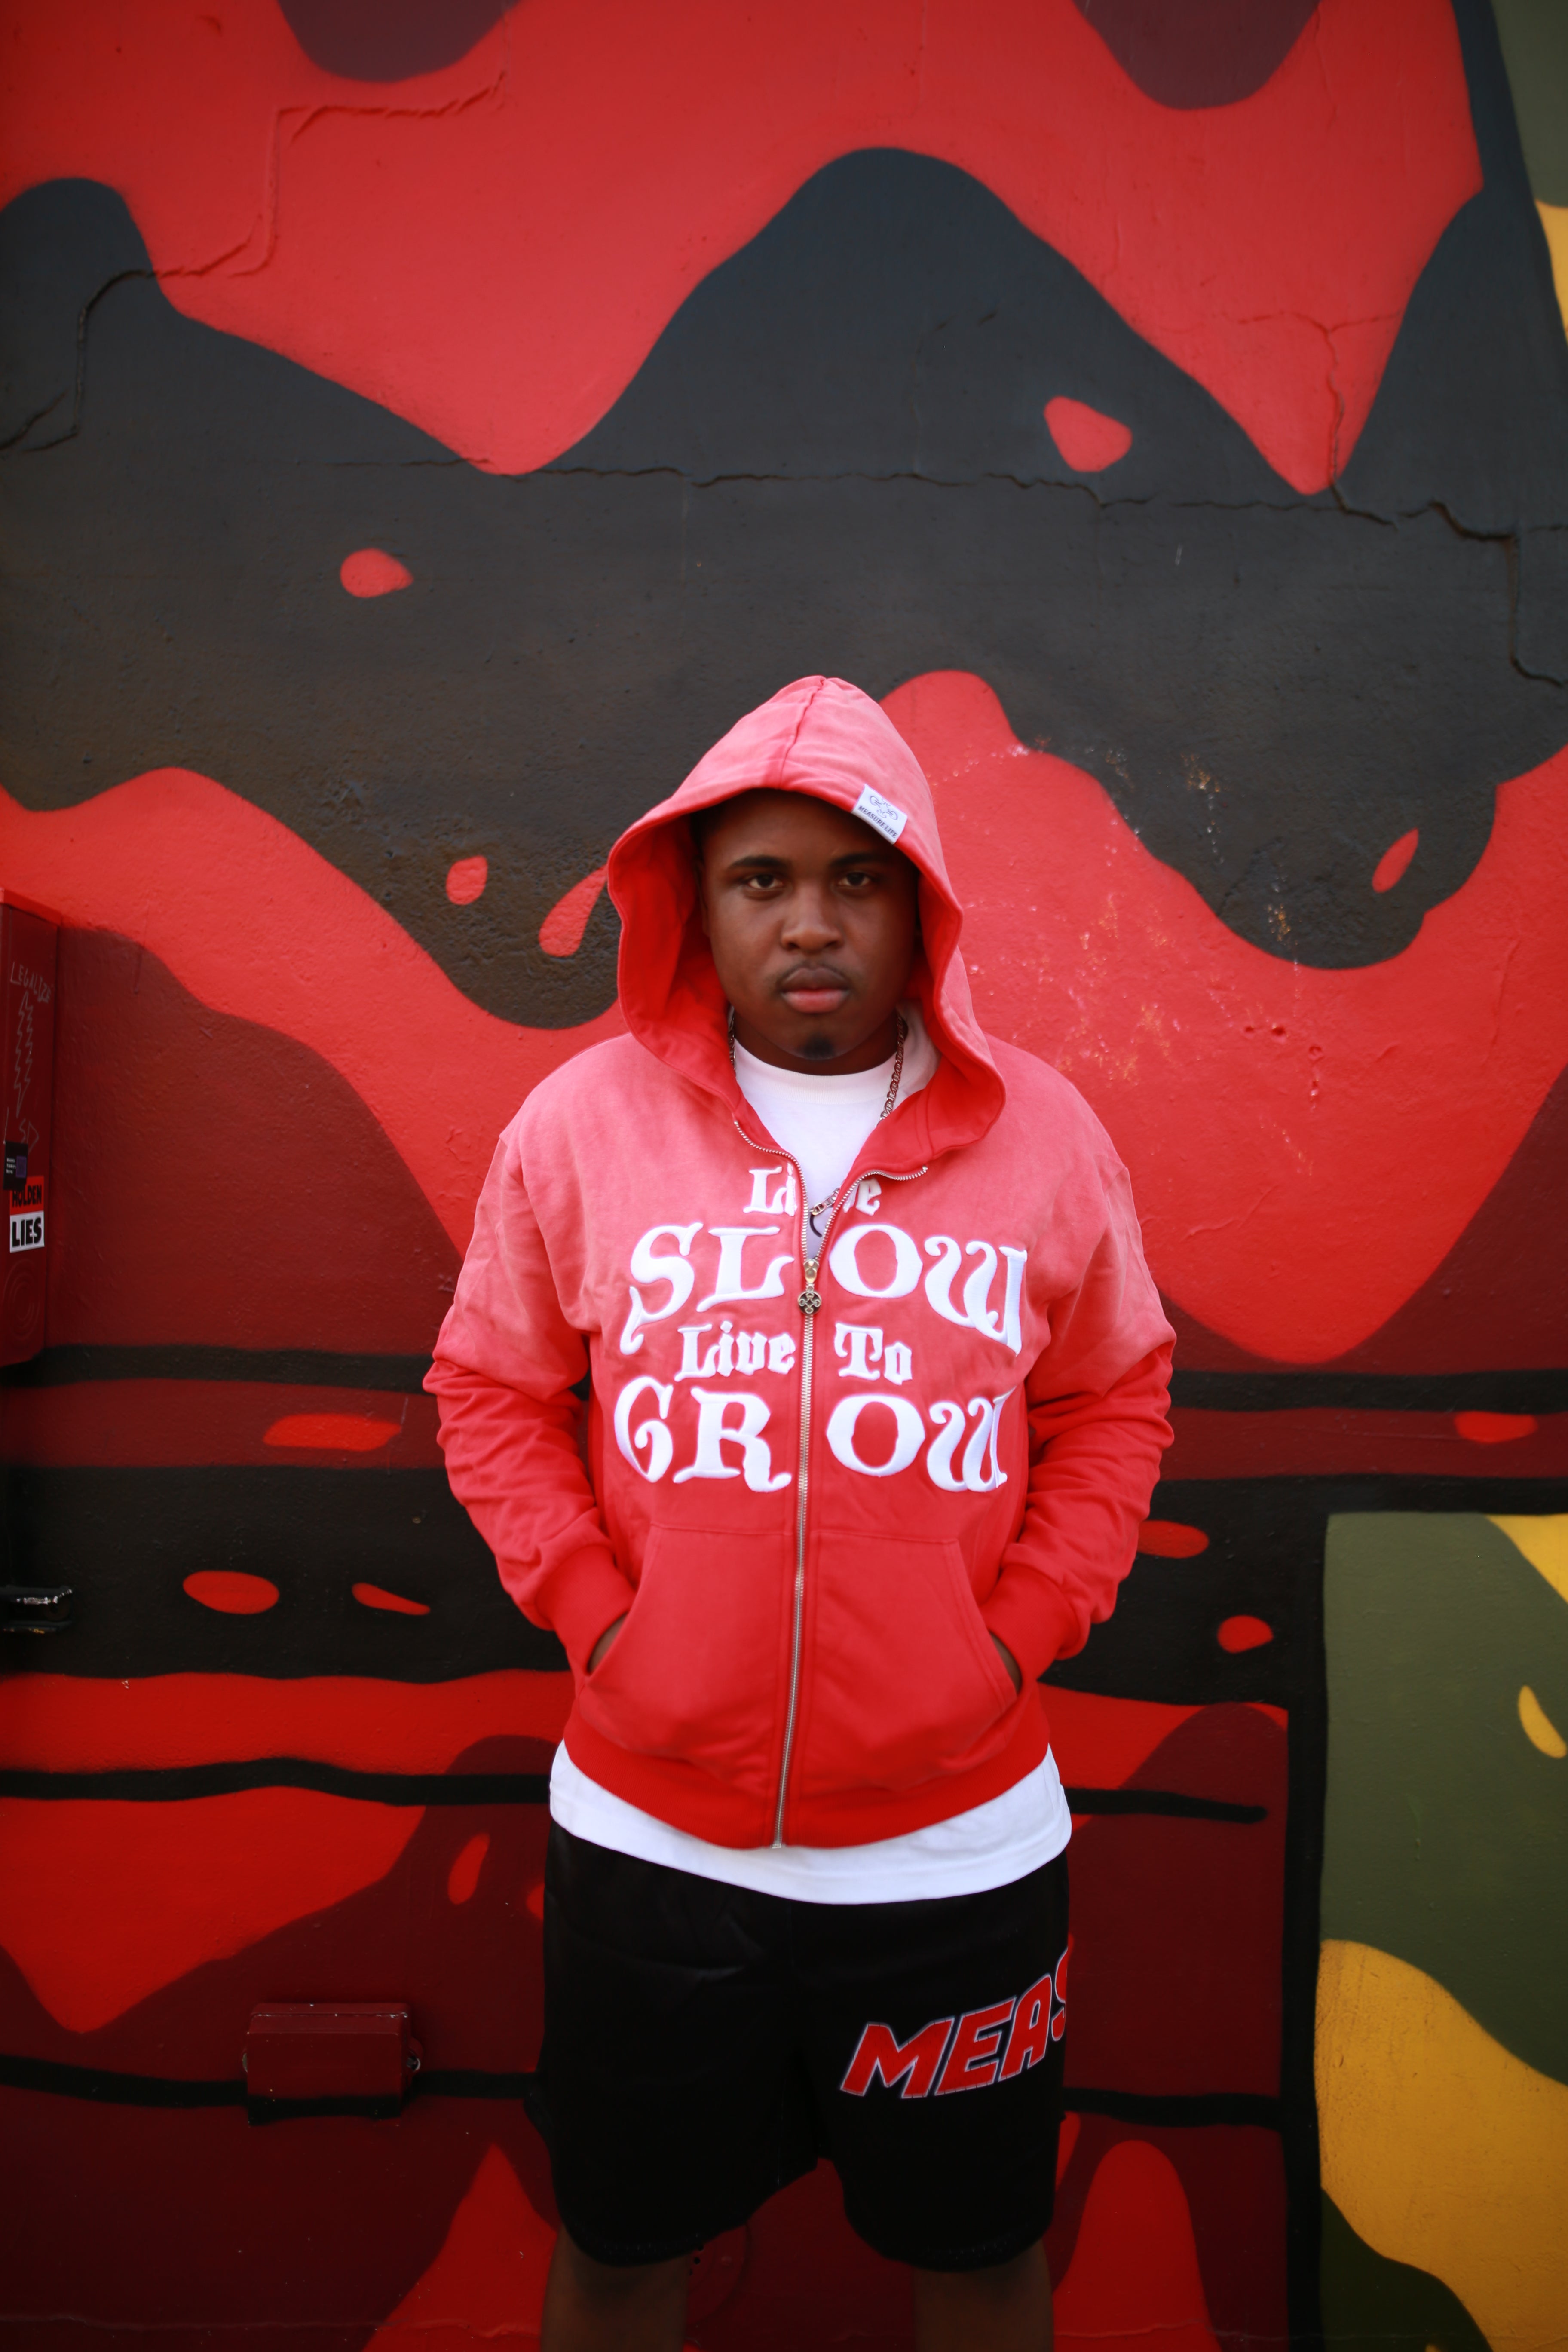 LIVE SLOW, LIVE TO GROW - RED HOODIE